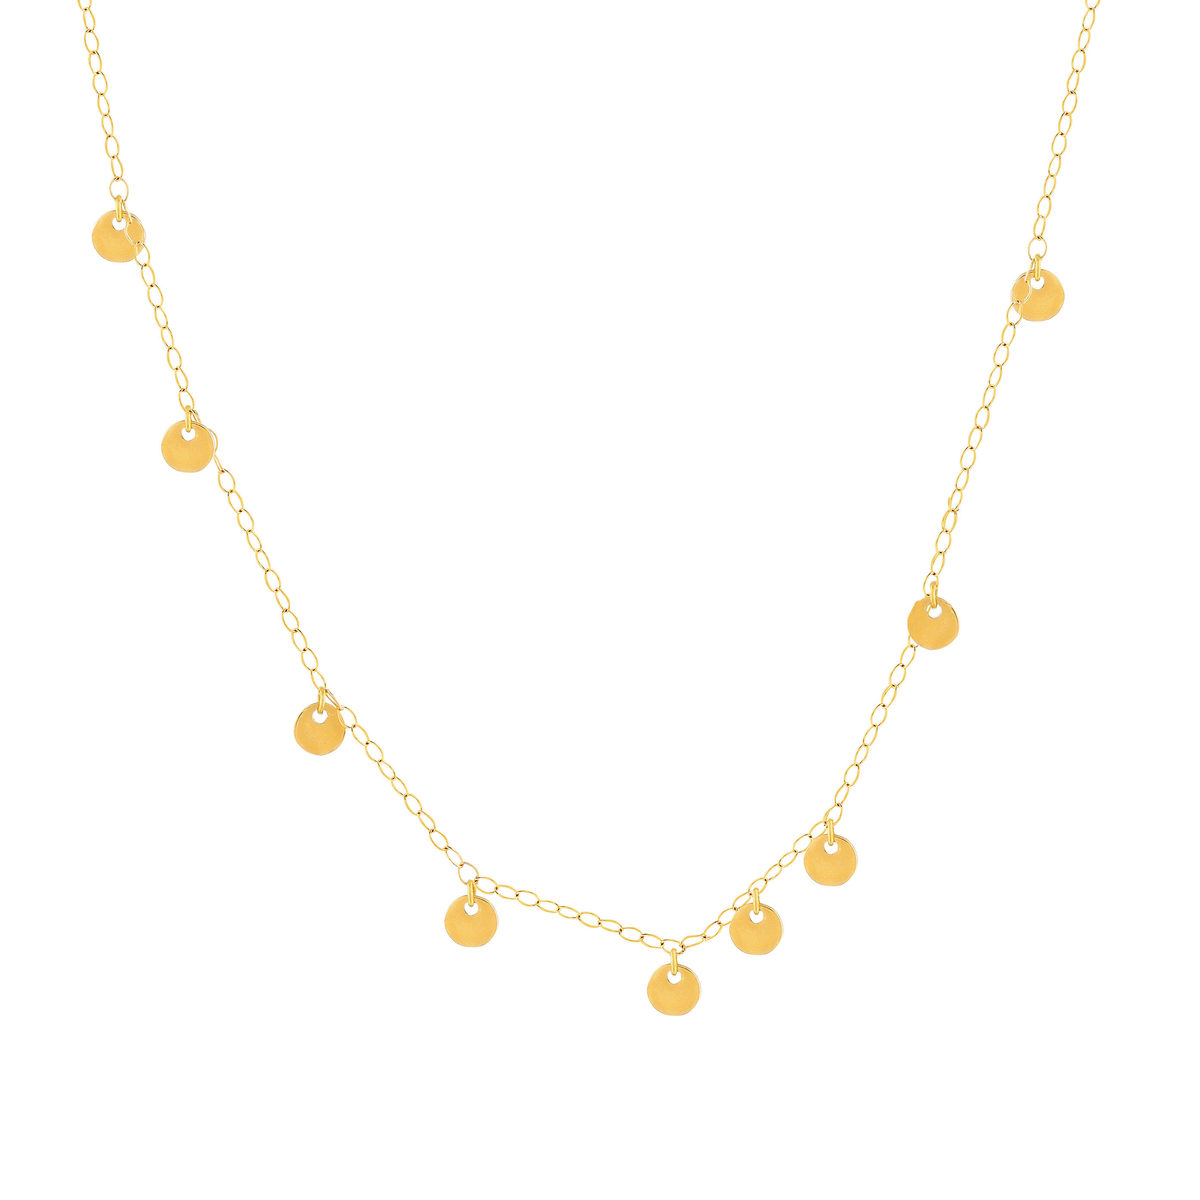 Collier or jaune 750 45 cm pampilles disques